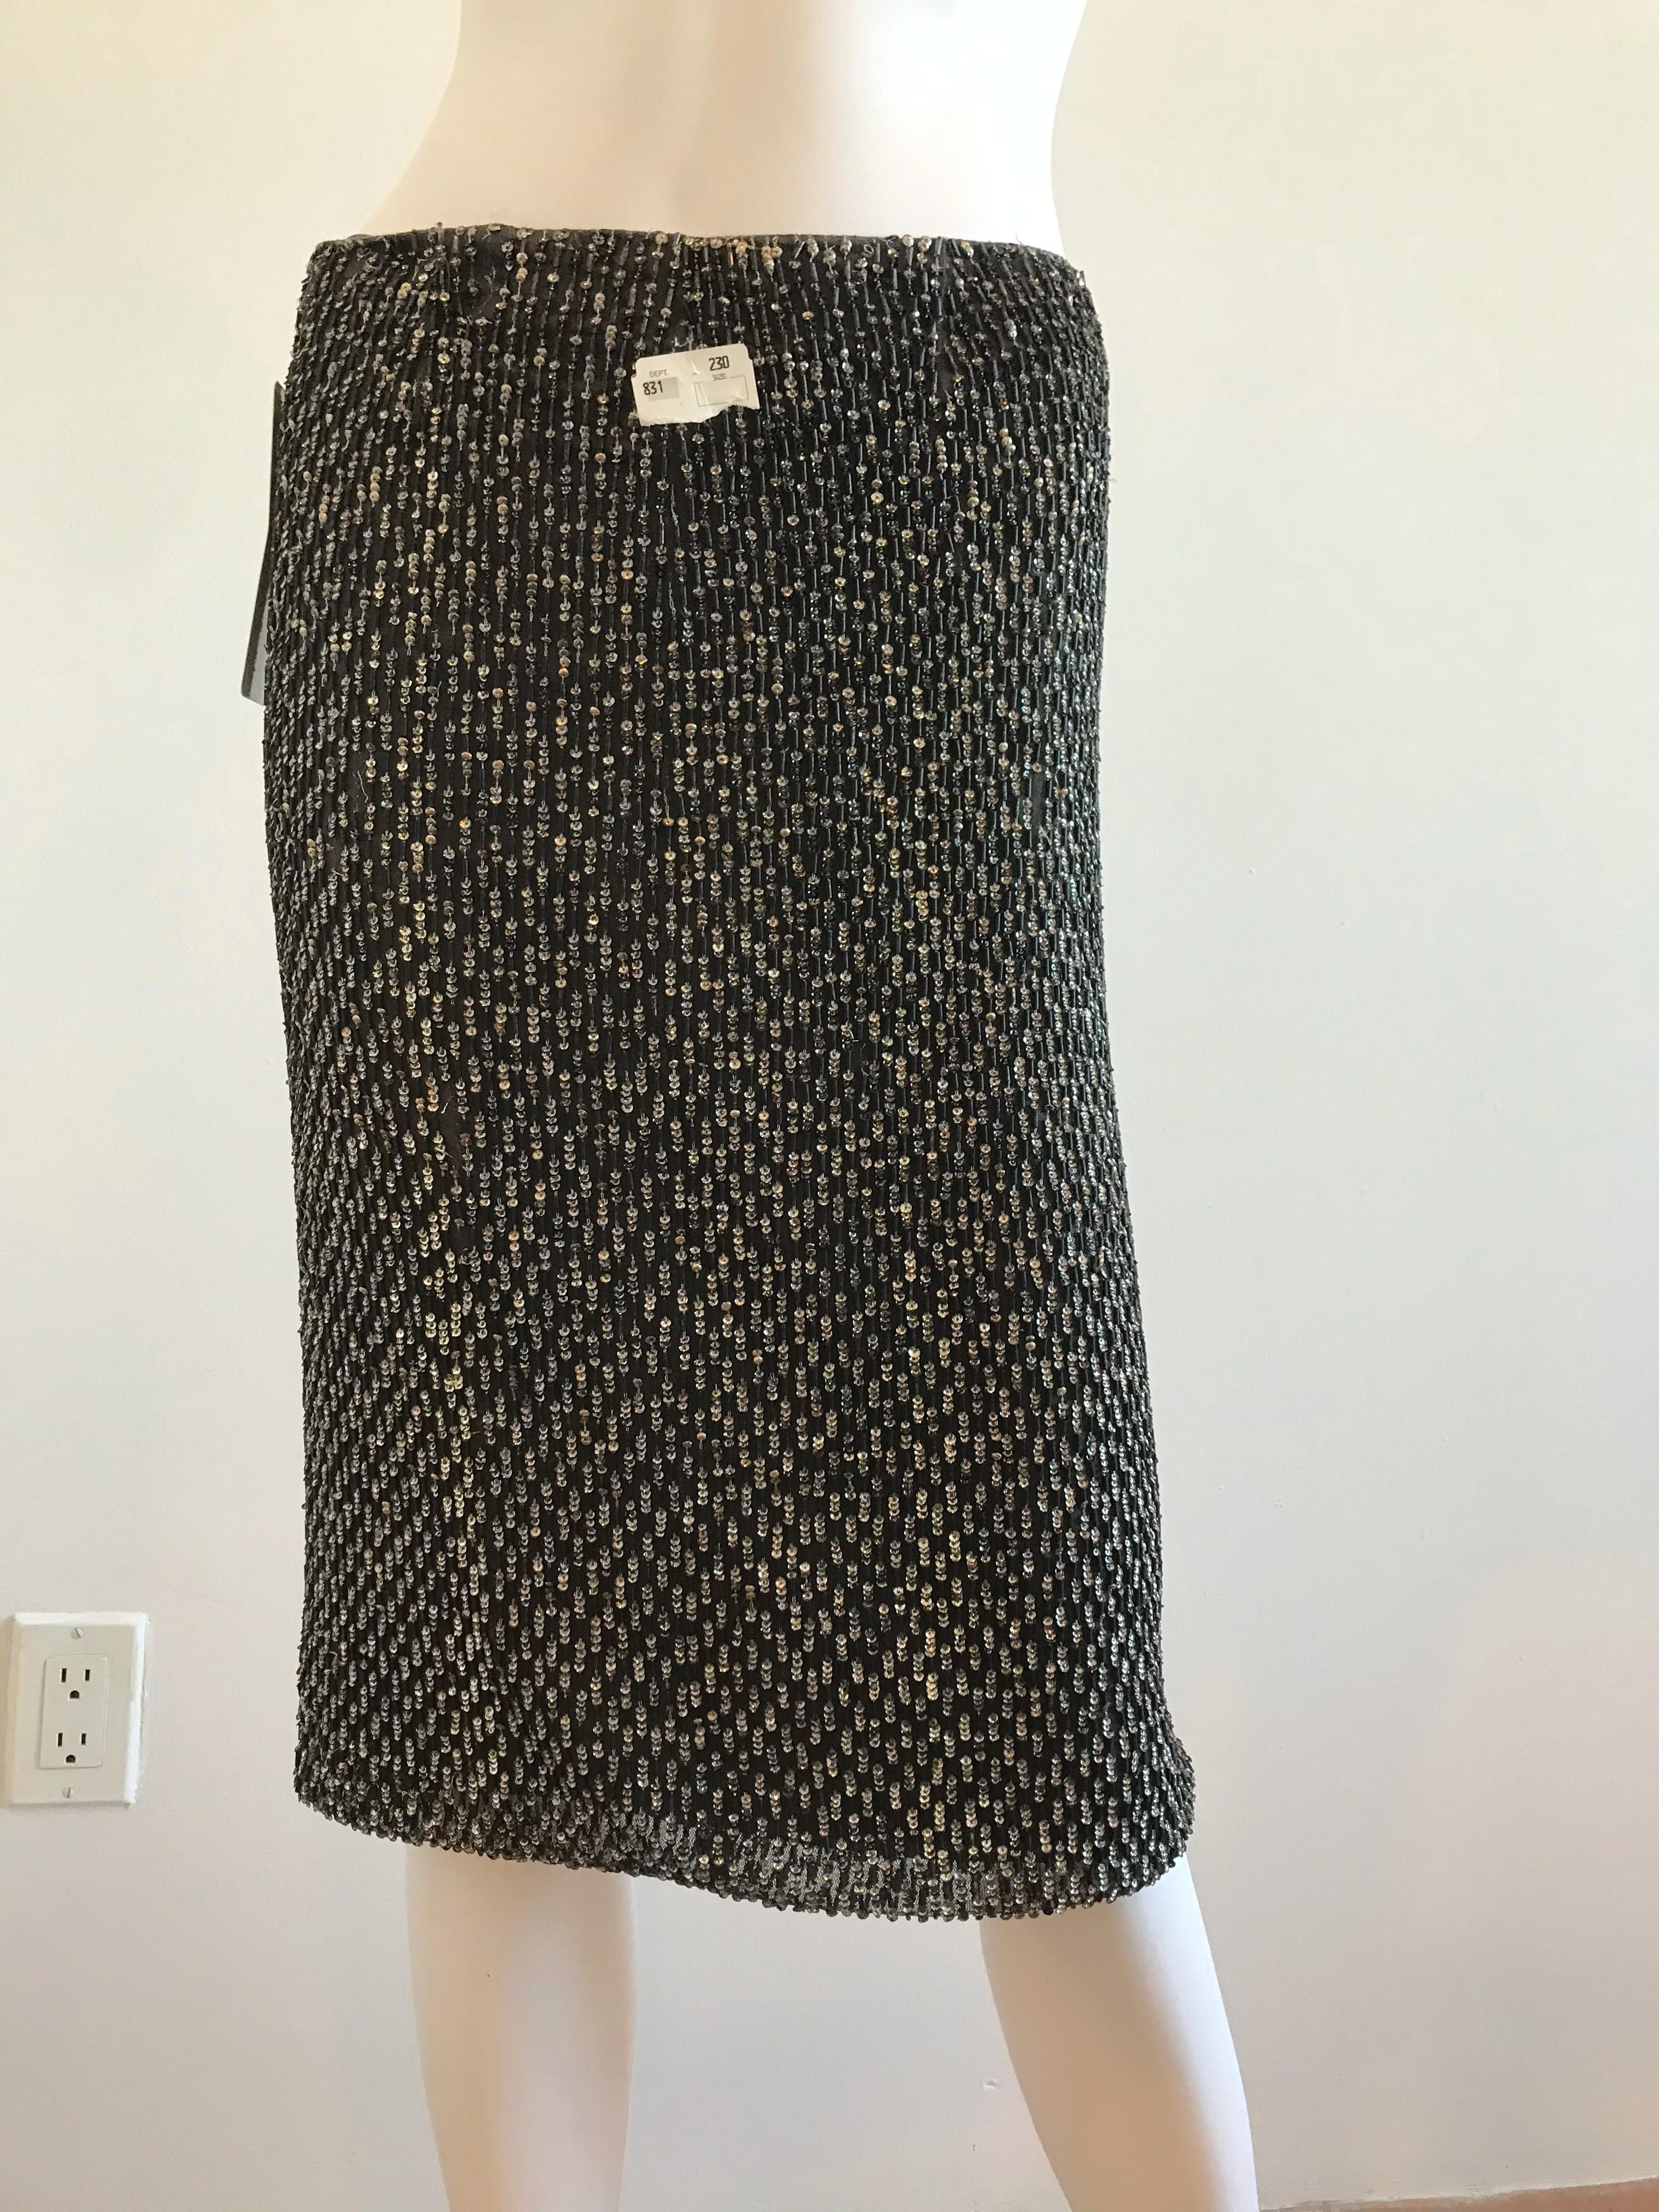 This Dolce & Gabbana slim skirt is completely beaded with black bugle beads, and accentuated with silver sequins. The elegant skirt is fully lined in black silk with an interior ribbon waistband and a back zipper enclosure. It is in good condition